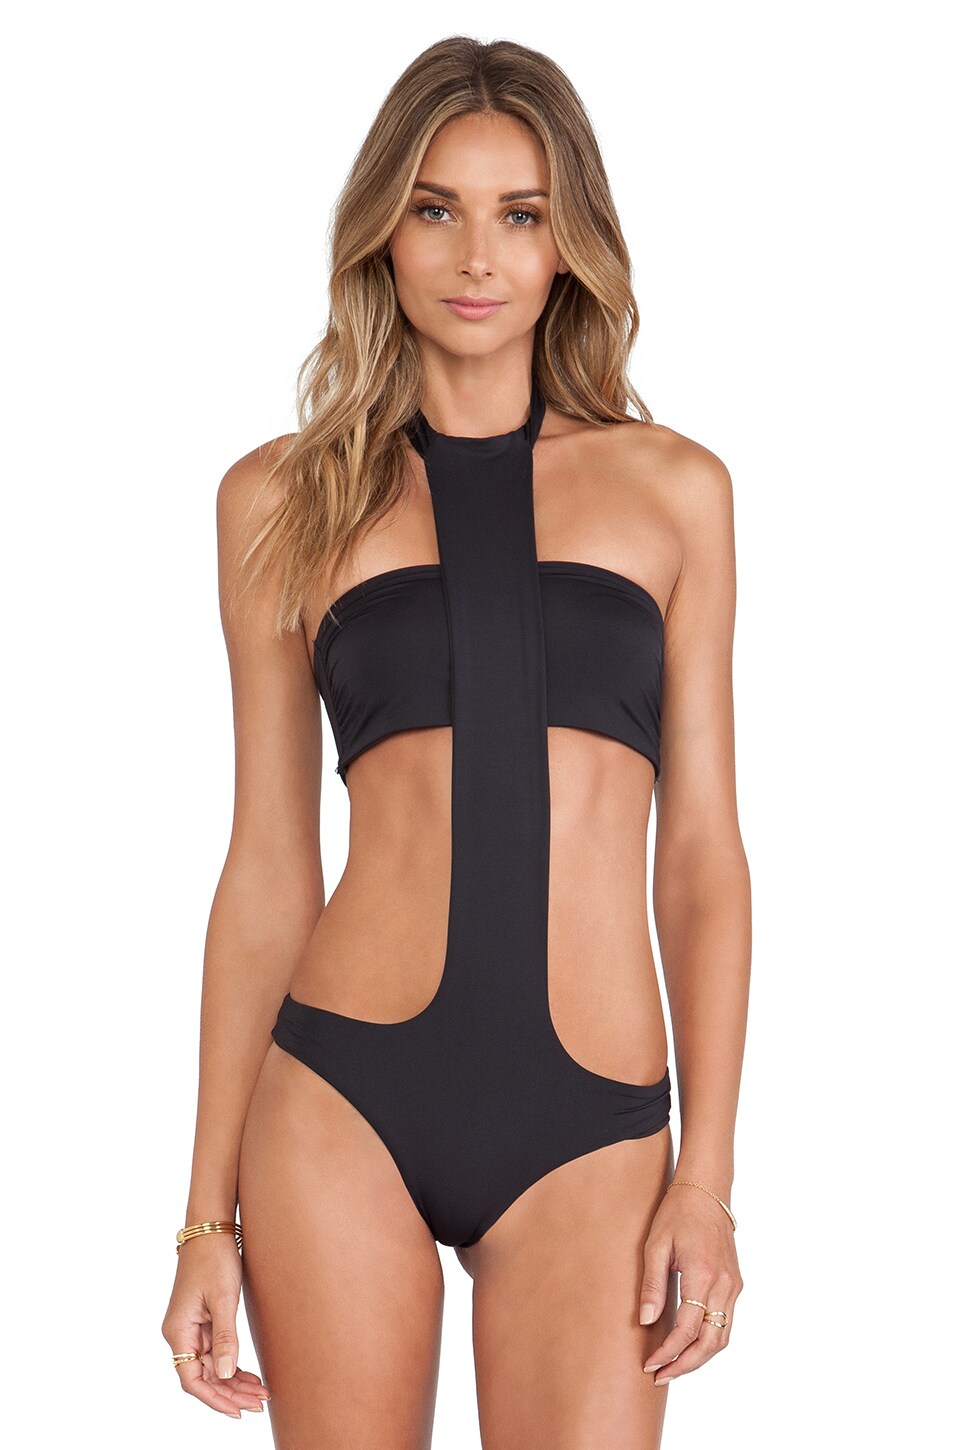 Share Andi One Piece in Black on Twitter (opens in a new window). favorite TAVIK...